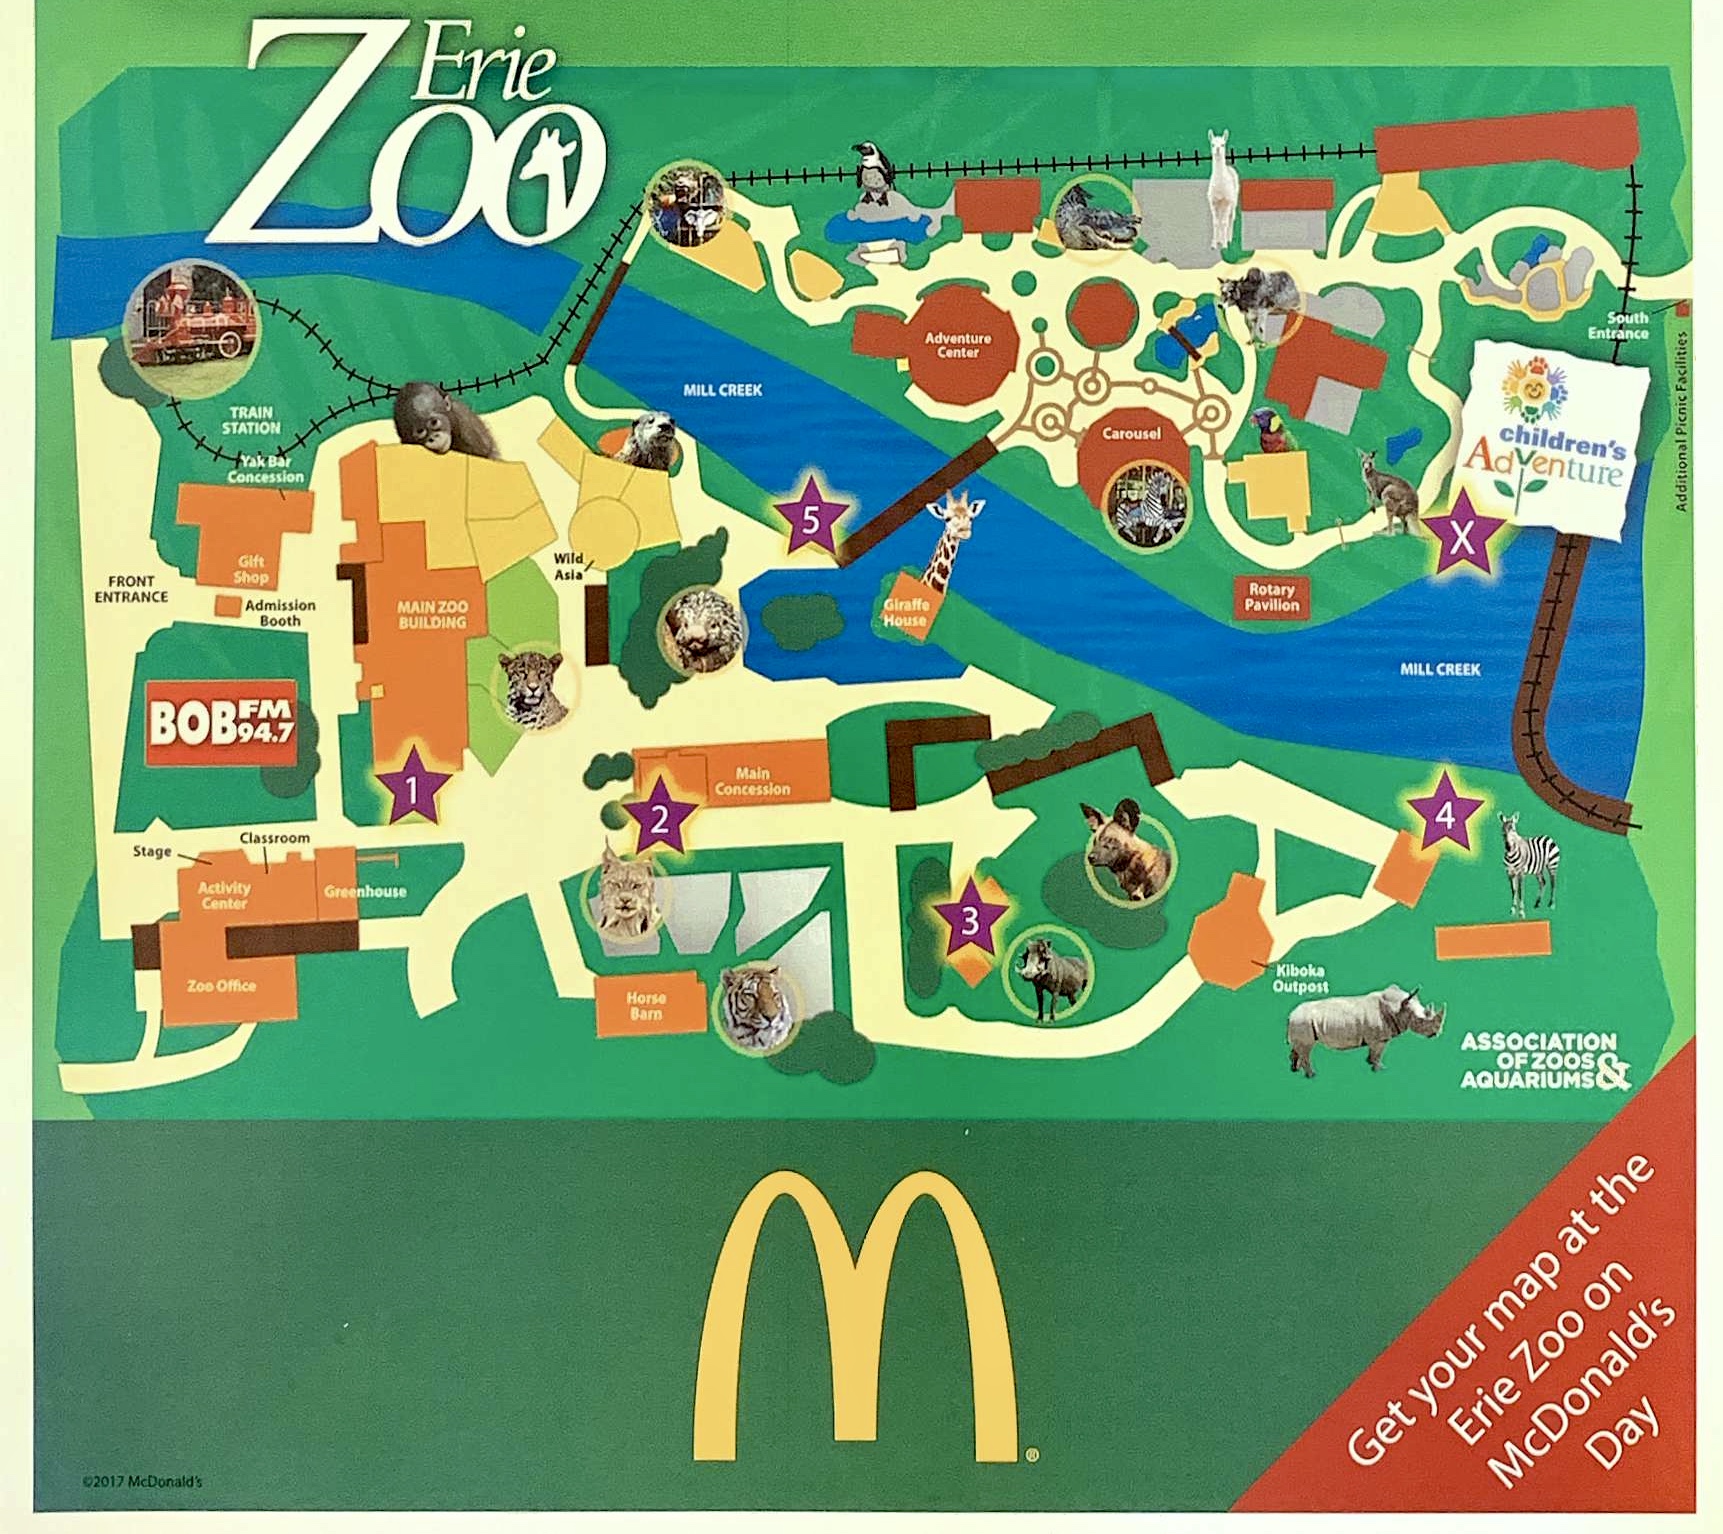 McDonald's Day at the Zoo